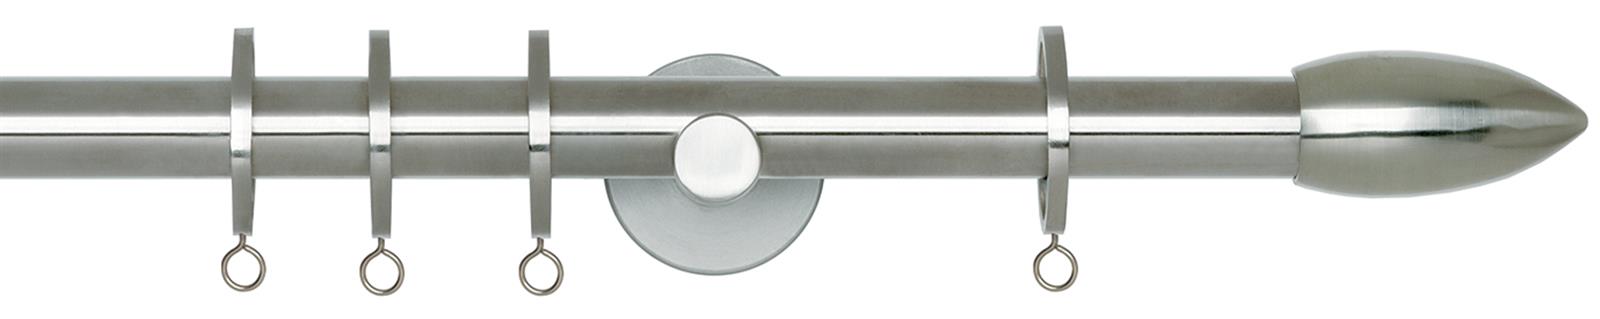 Neo 19mm Pole Stainless Steel Bullet